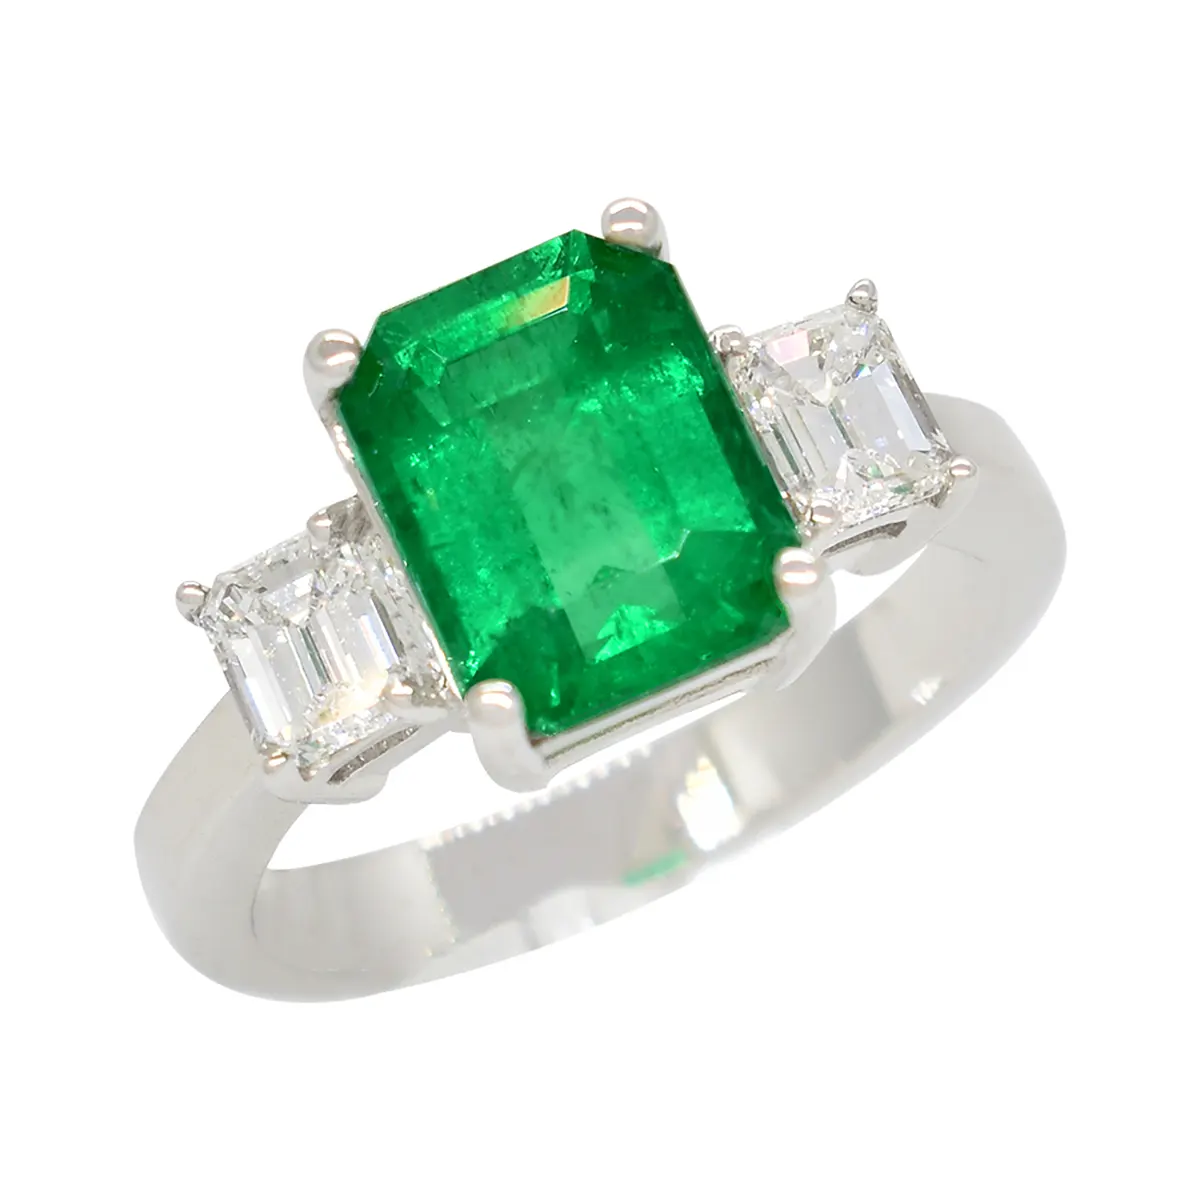 emerald-ring-in-18k-white-gold-with-emerald-cut-diamonds-in-3-stones-ring-style